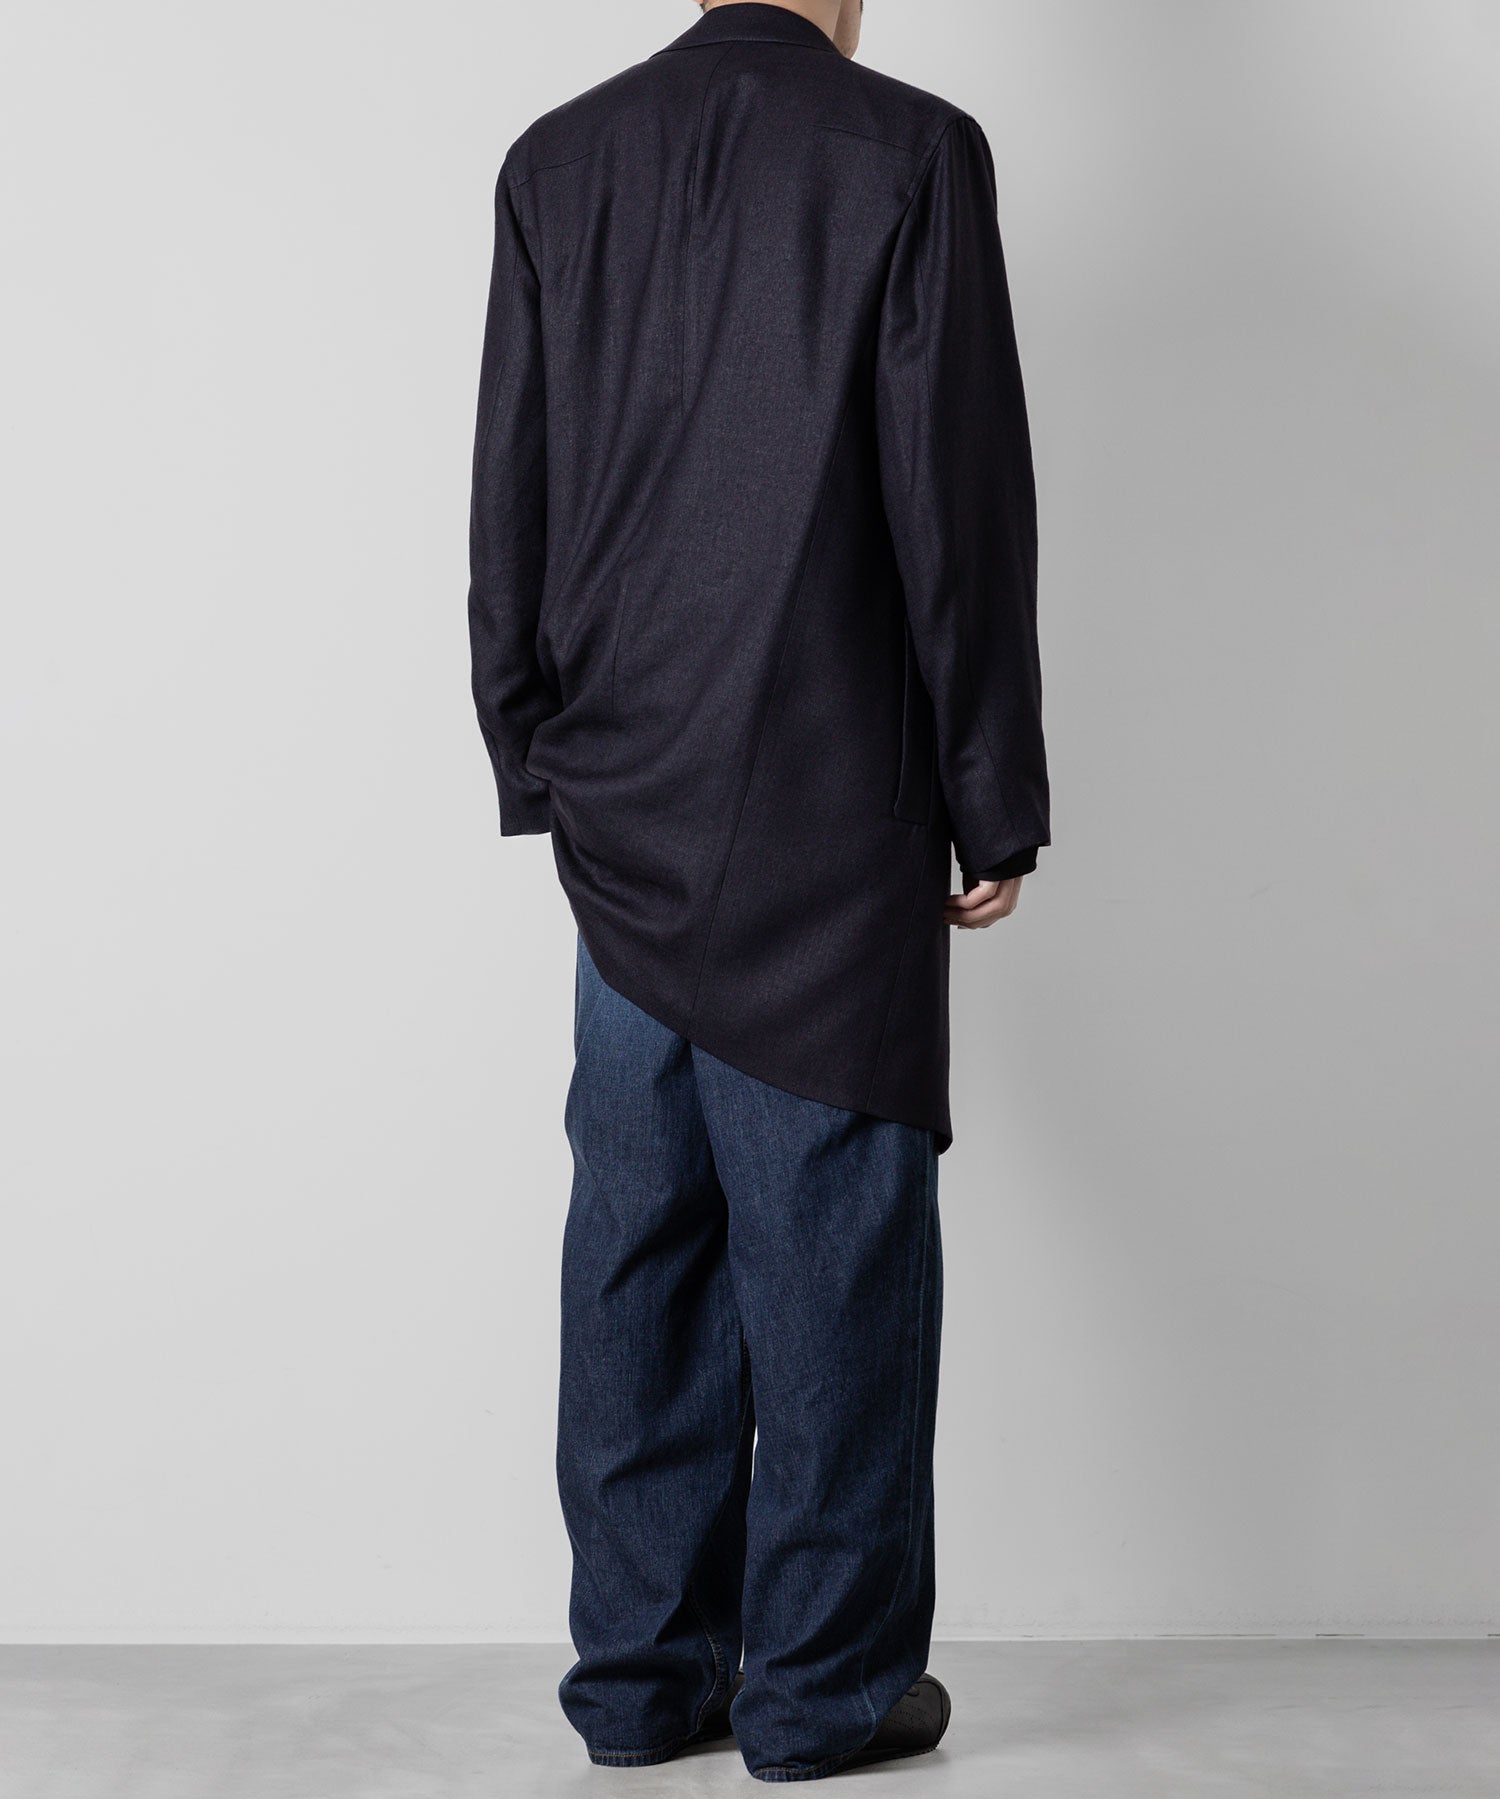 ato(アトウ)のWASHED WIDE DENIMのNAVY